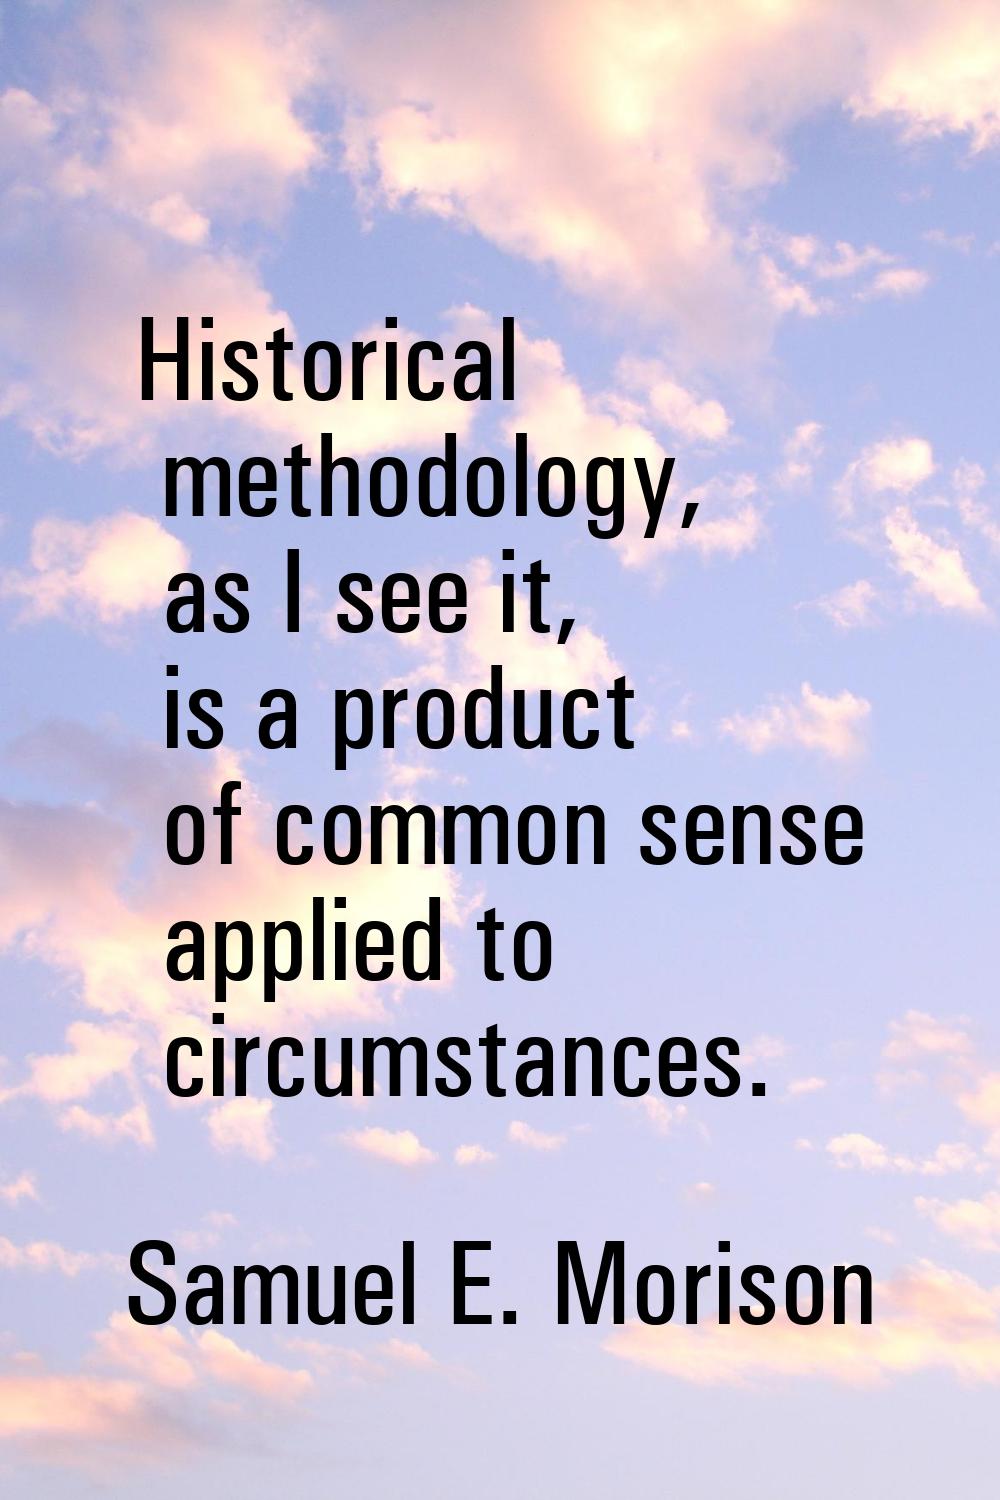 Historical methodology, as I see it, is a product of common sense applied to circumstances.